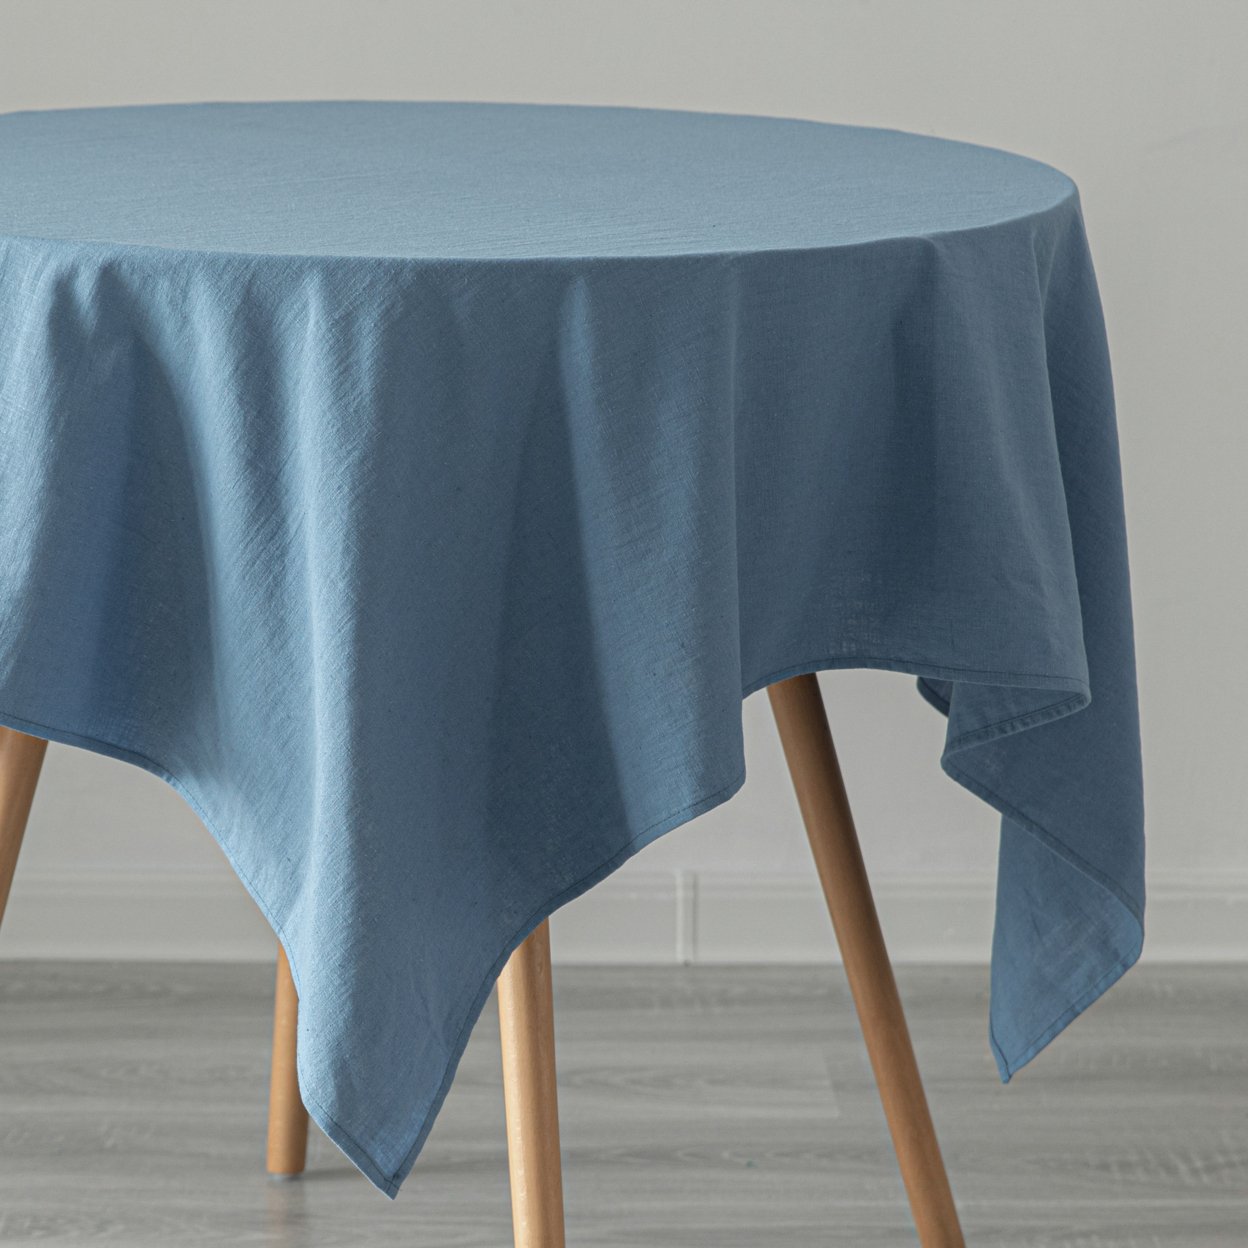 Deerlux 100 Percent Pure Linen Washable Tablecloth Solid Color - 52 X 78 In. Blue